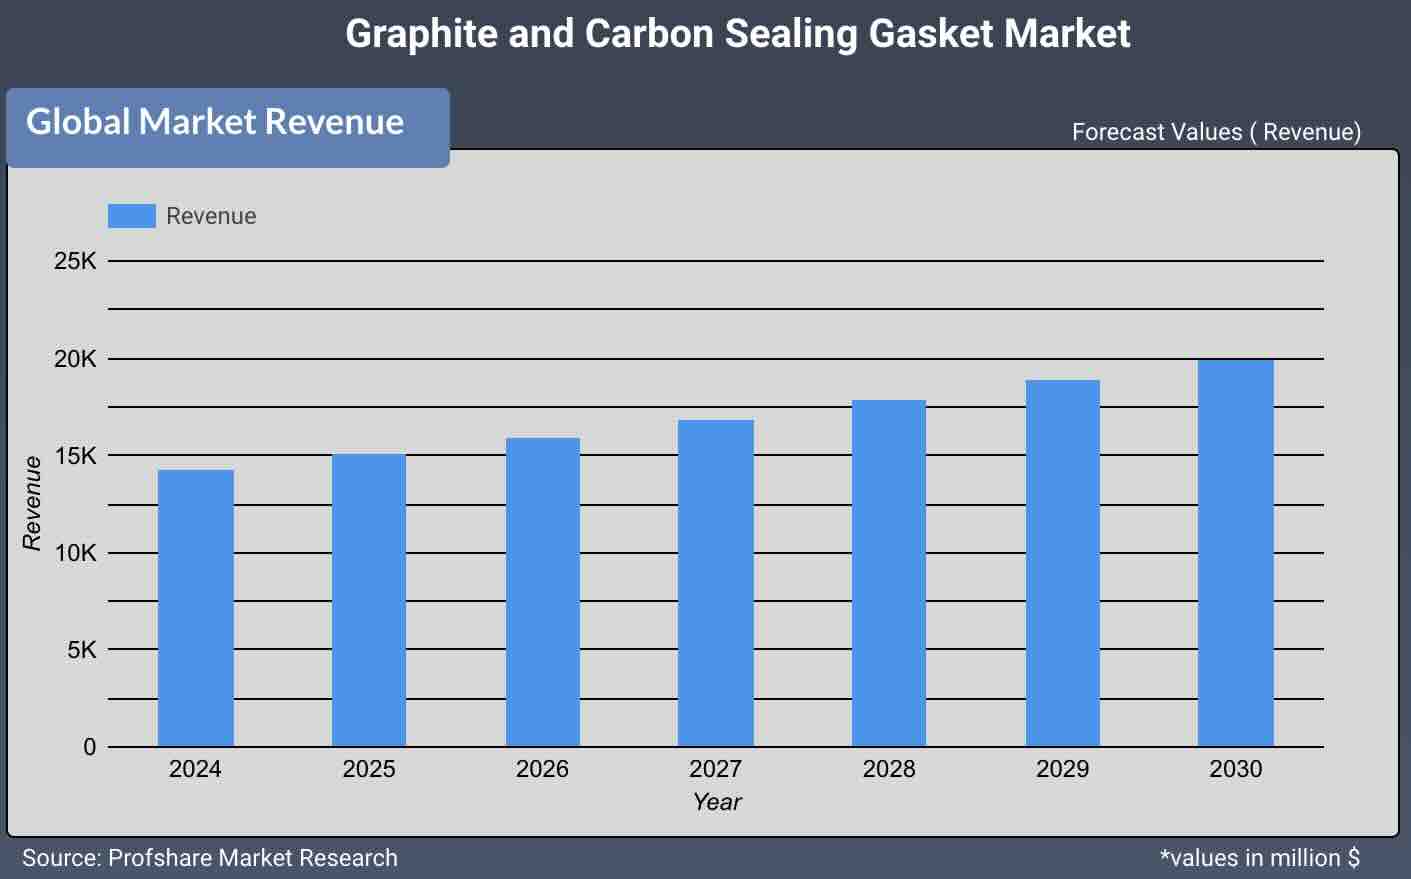 Graphite and Carbon Sealing Gasket Market